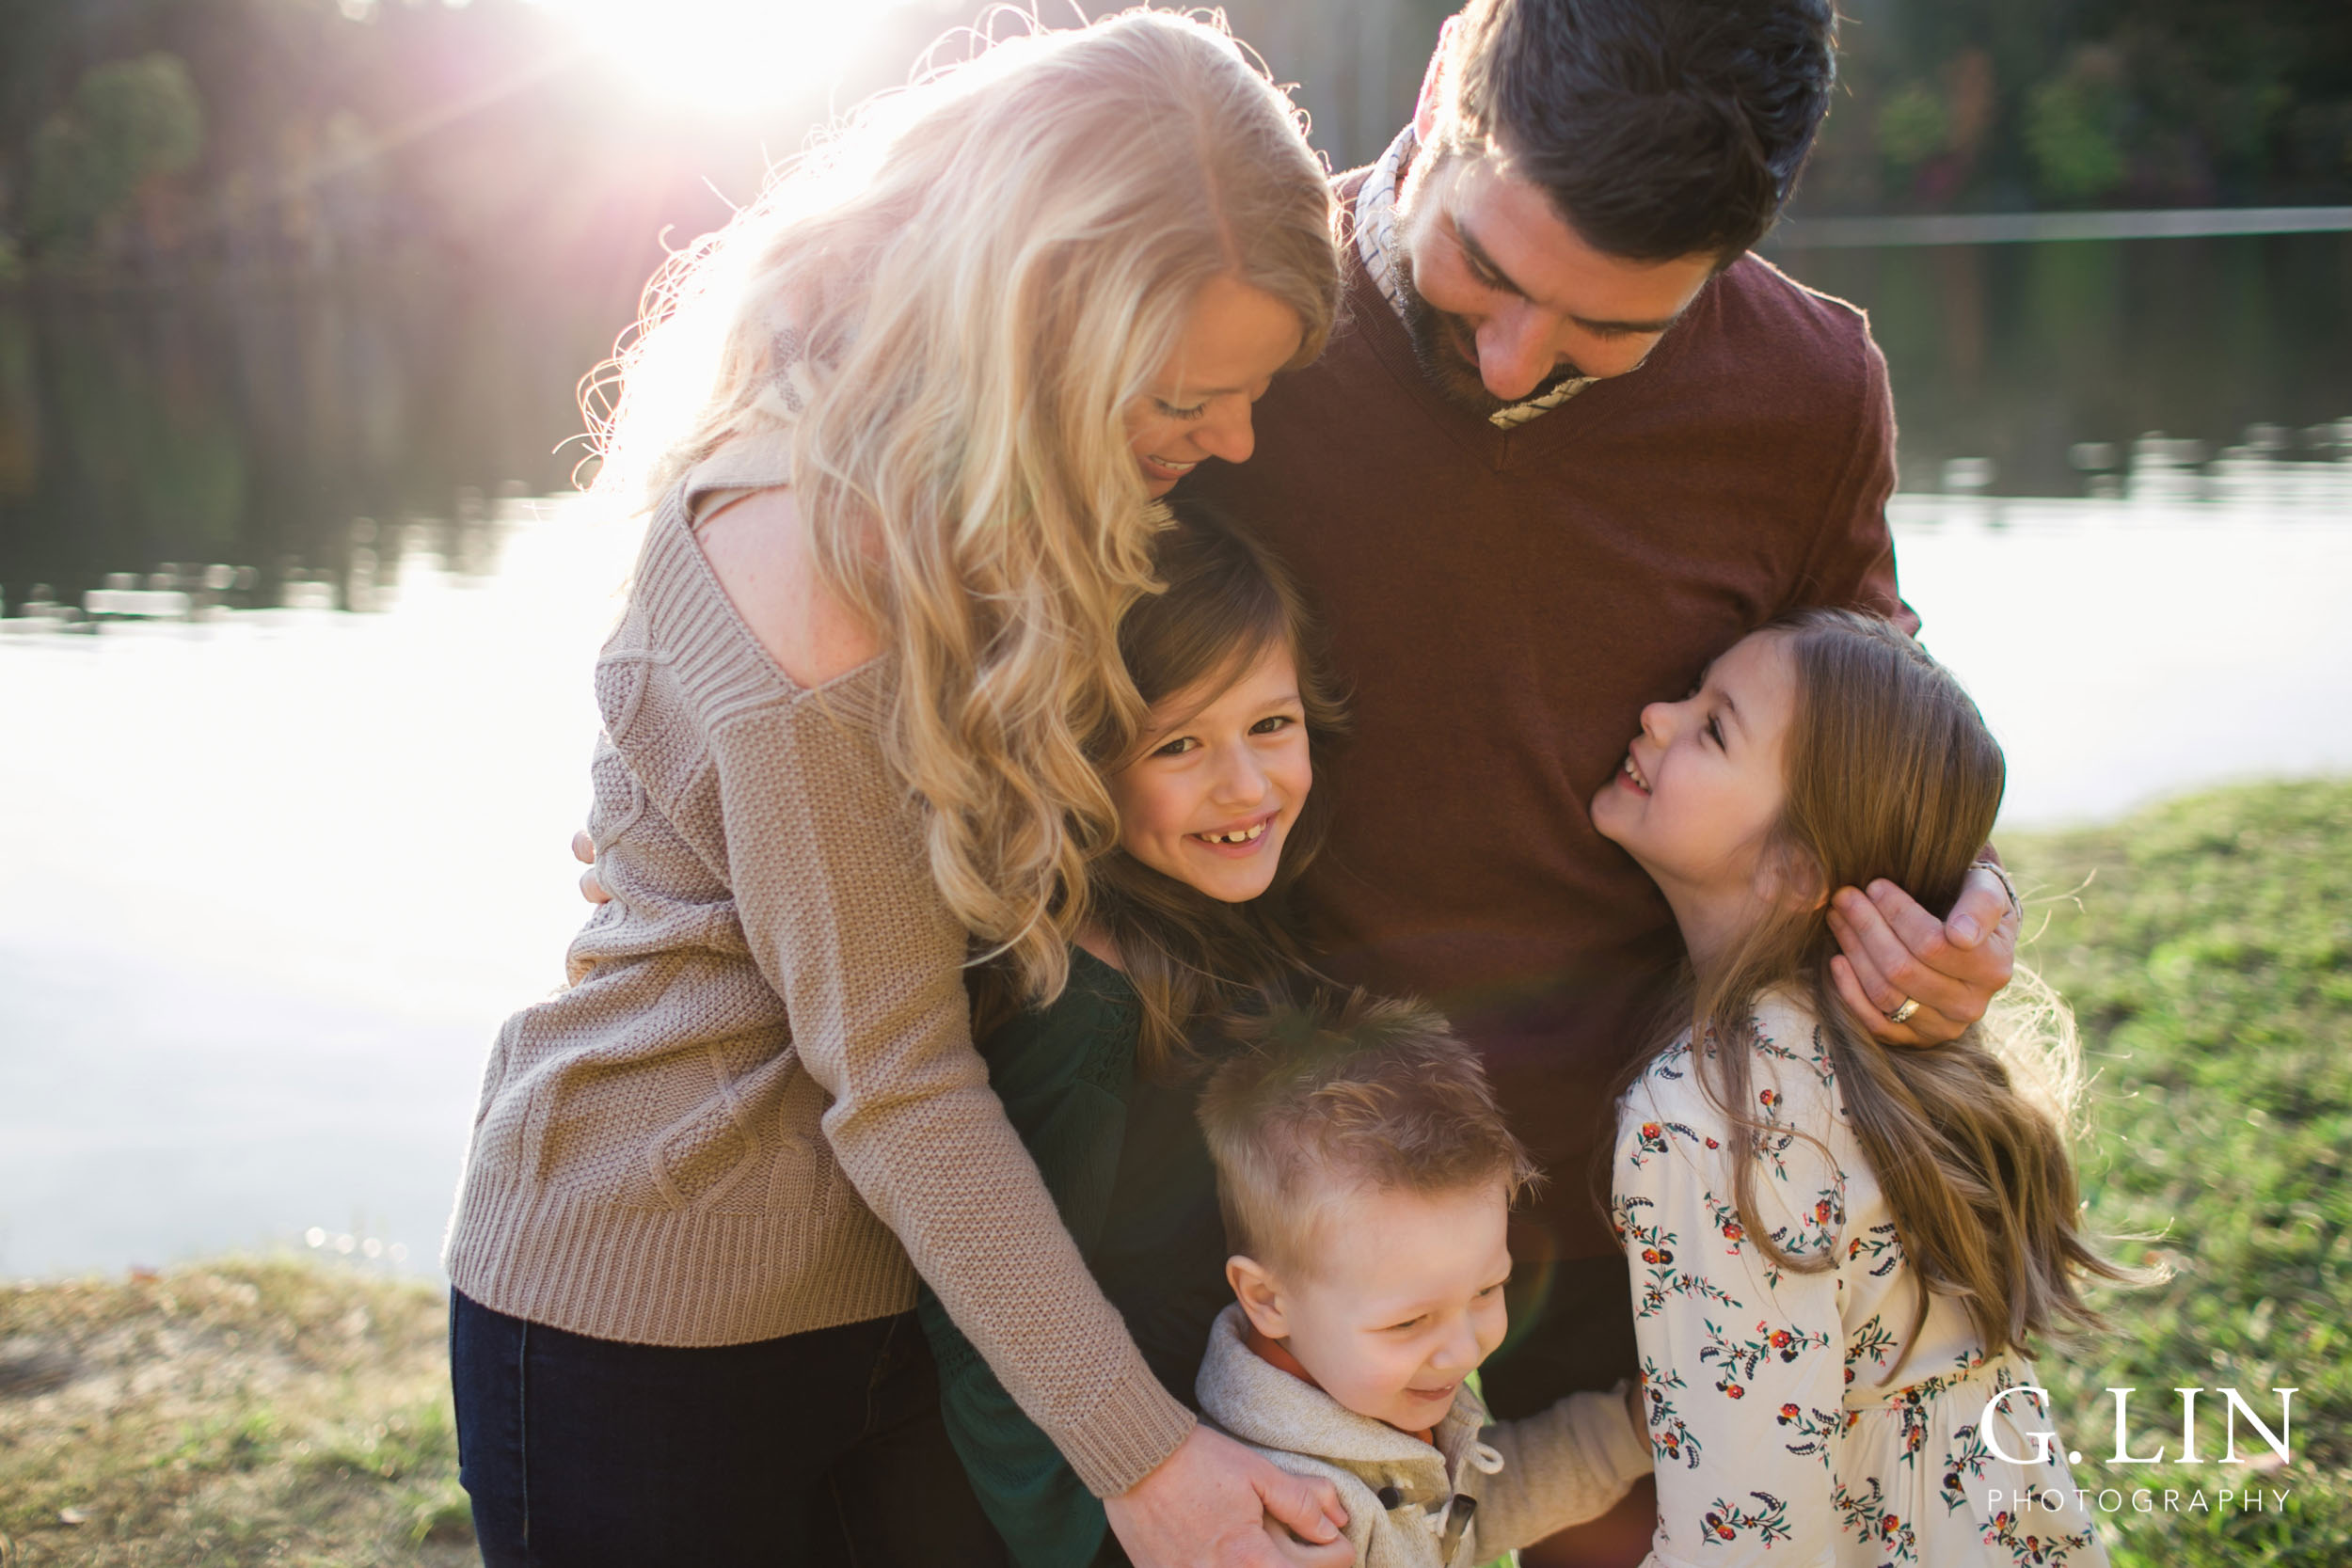 Raleigh Family Photographer | G. Lin Photography | Candid photo of family looking at each other and smiling by the lake during golden hour